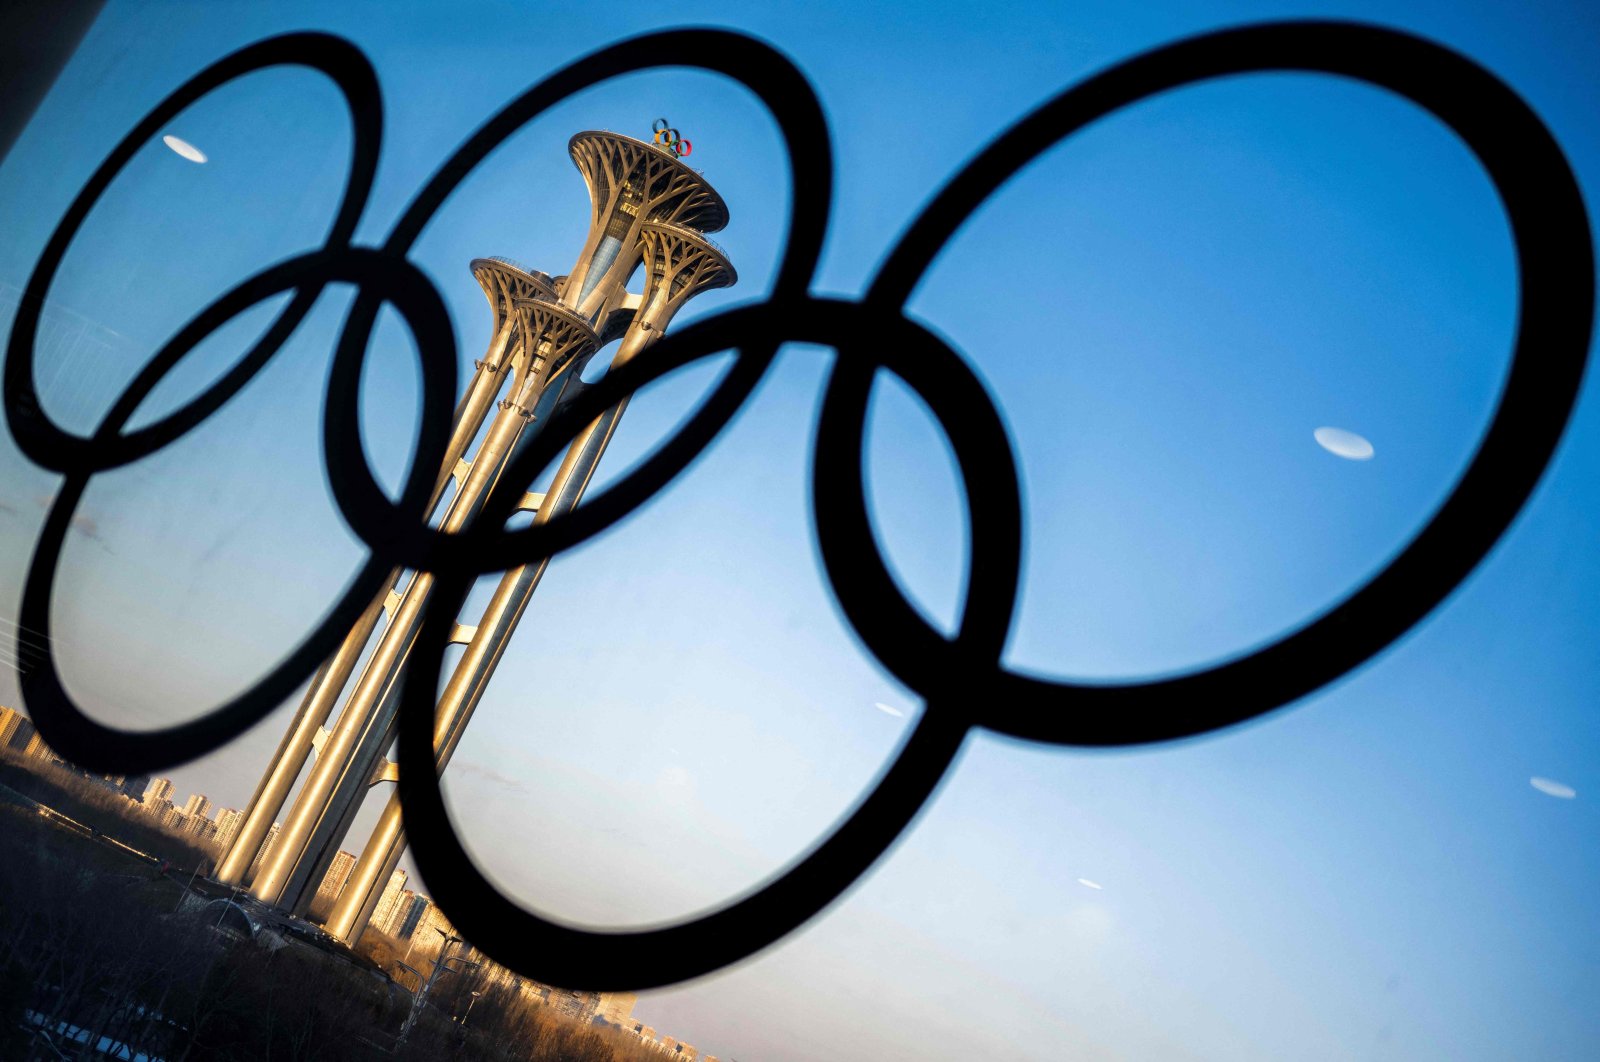 The Beijing Olympic Tower is seen from the Main Media Centre (MMC), Beijing, China, Jan. 25, 2022. (AFP Photo)